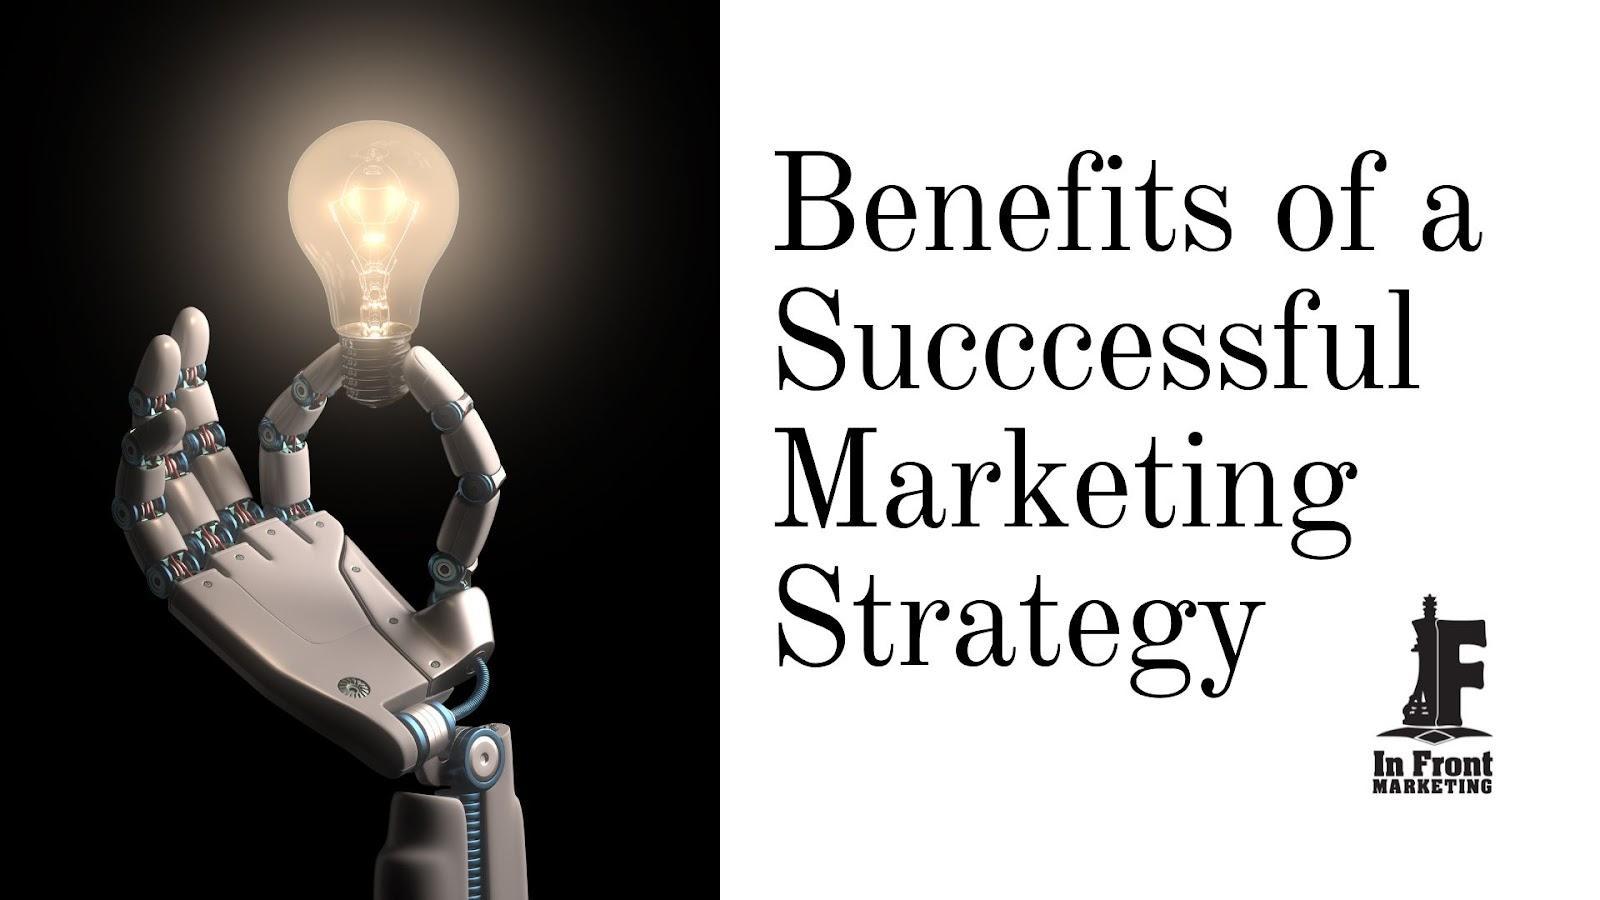 Successful Marketing Strategies - what are your goals for organic growth?